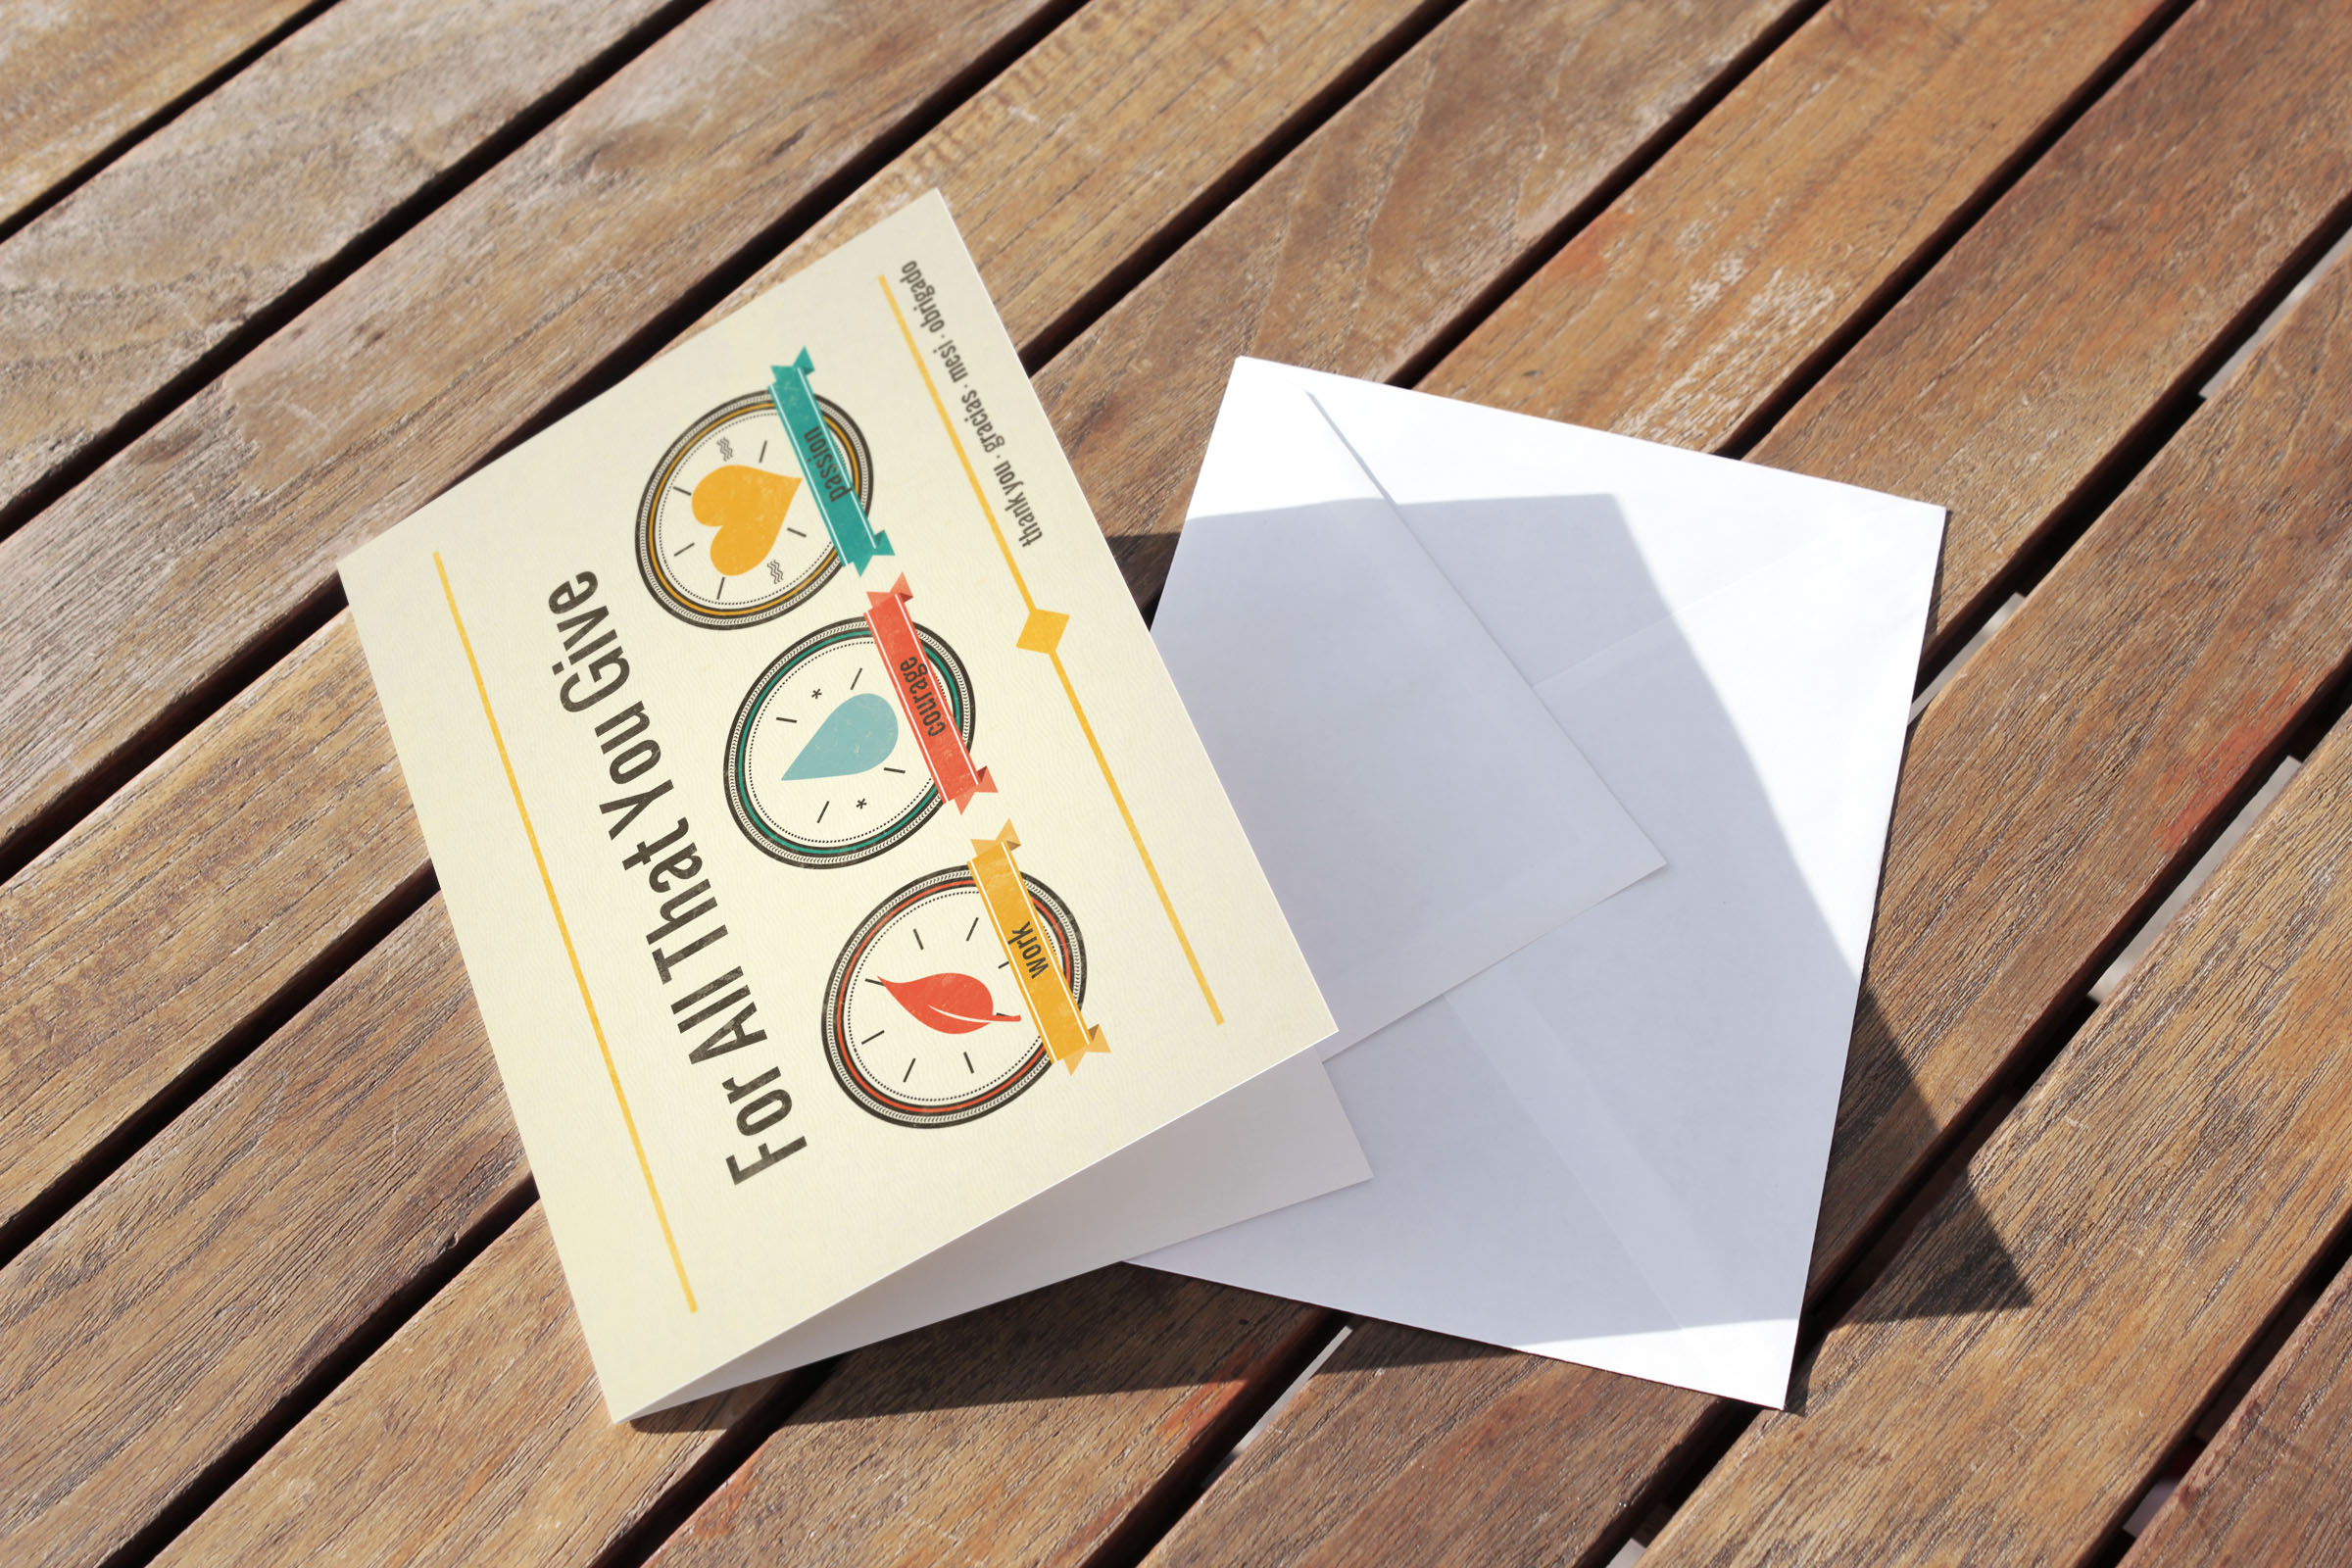  Client: Collier County Neighborhood Stories Project  Type: Thank You Card 